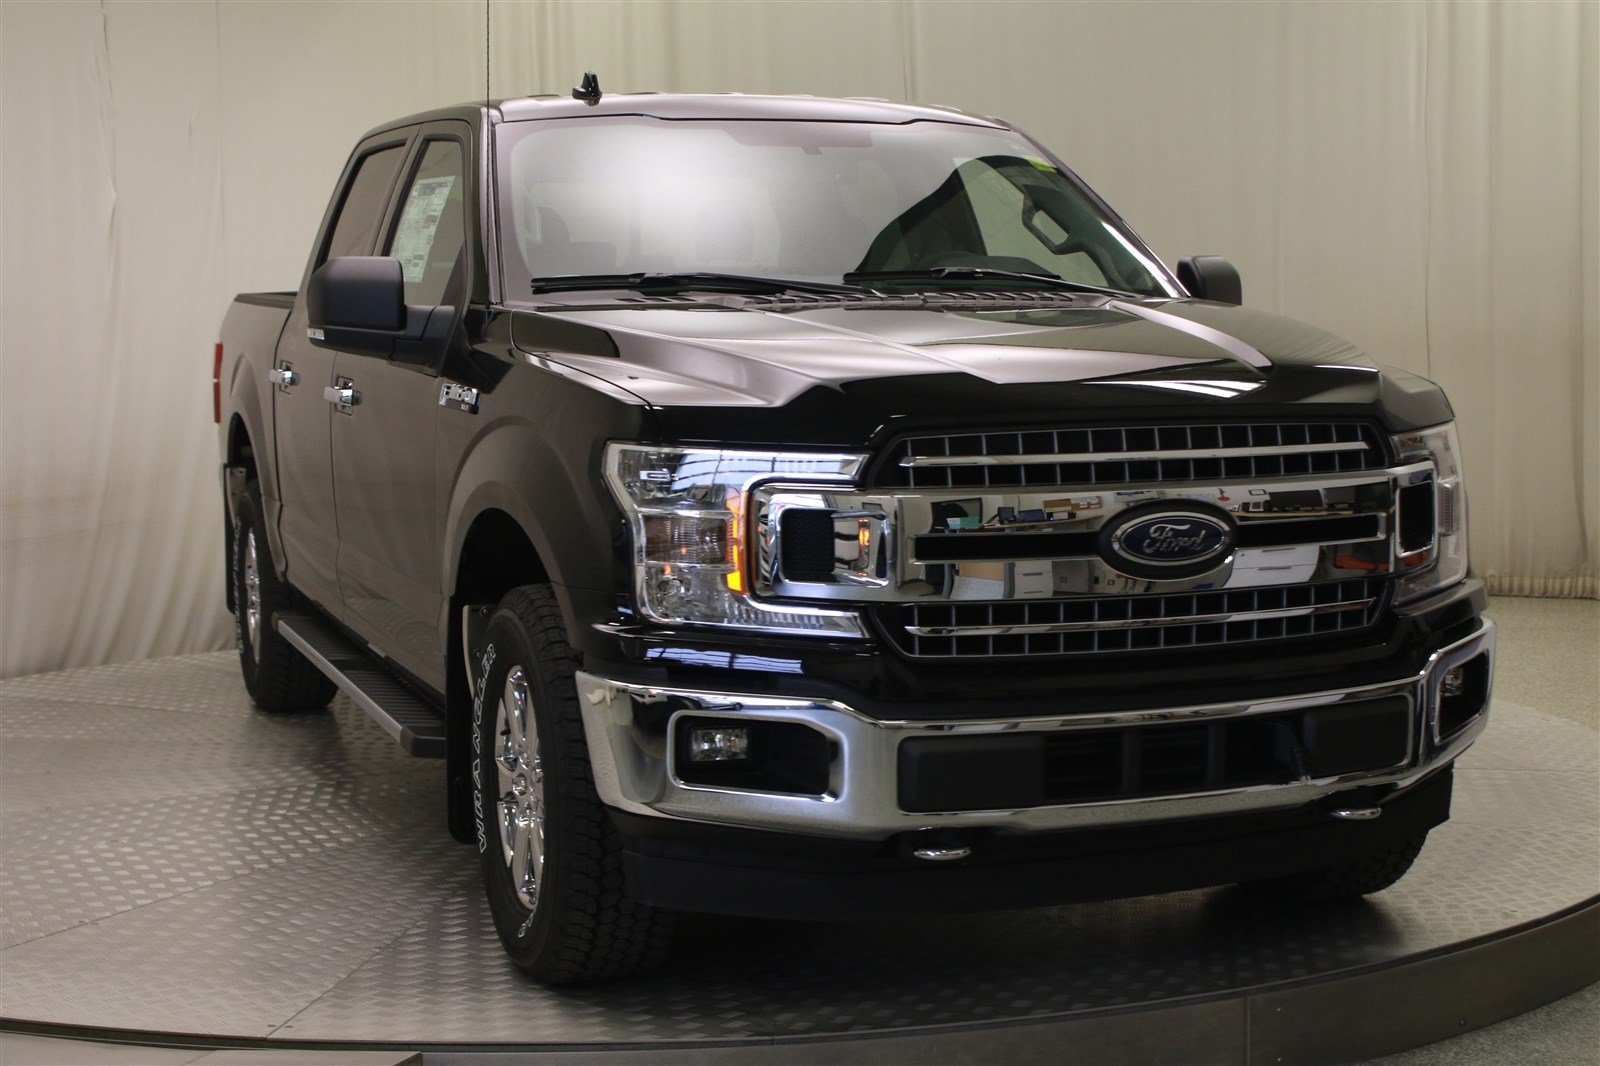 New 2018 Ford F-150 XLT*3.5L*Navigation*FX4*XTR SuperCrew Pickup w/ 5'5 2018 Ford F 150 Xlt Supercrew 4wd Towing Capacity